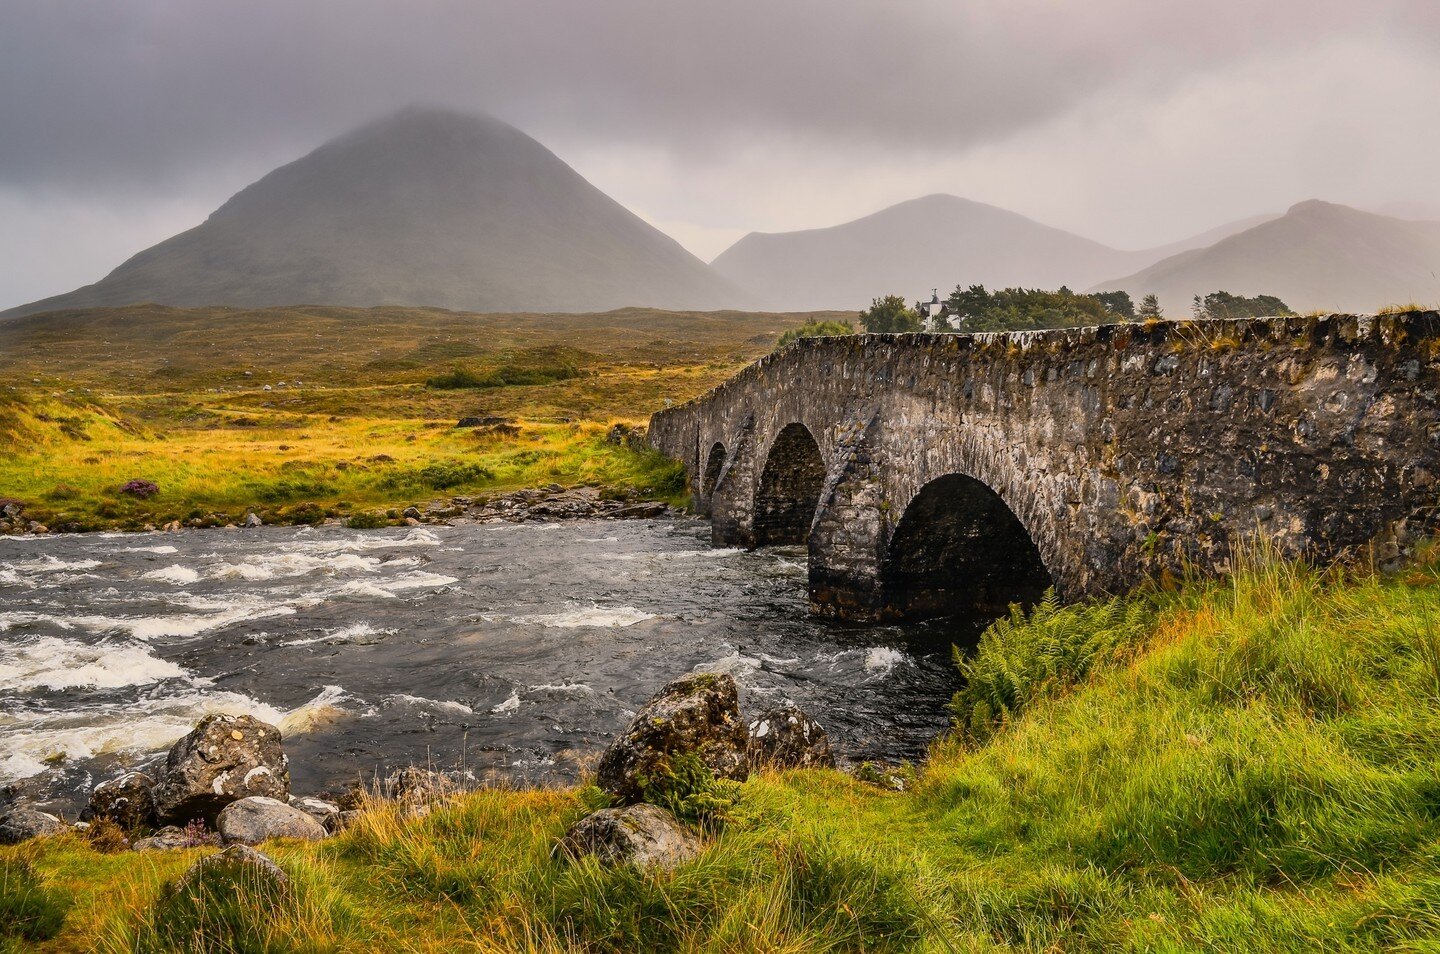 There are no trolls under this beautiful stone bridge. Instead, you're met with breathtaking views and rumors of magical water. It's said that the River Sligachan was enchanted by fairies.⁣ 🧚⁠
⁠
The story surrounds one of Scotland's greatest warrior